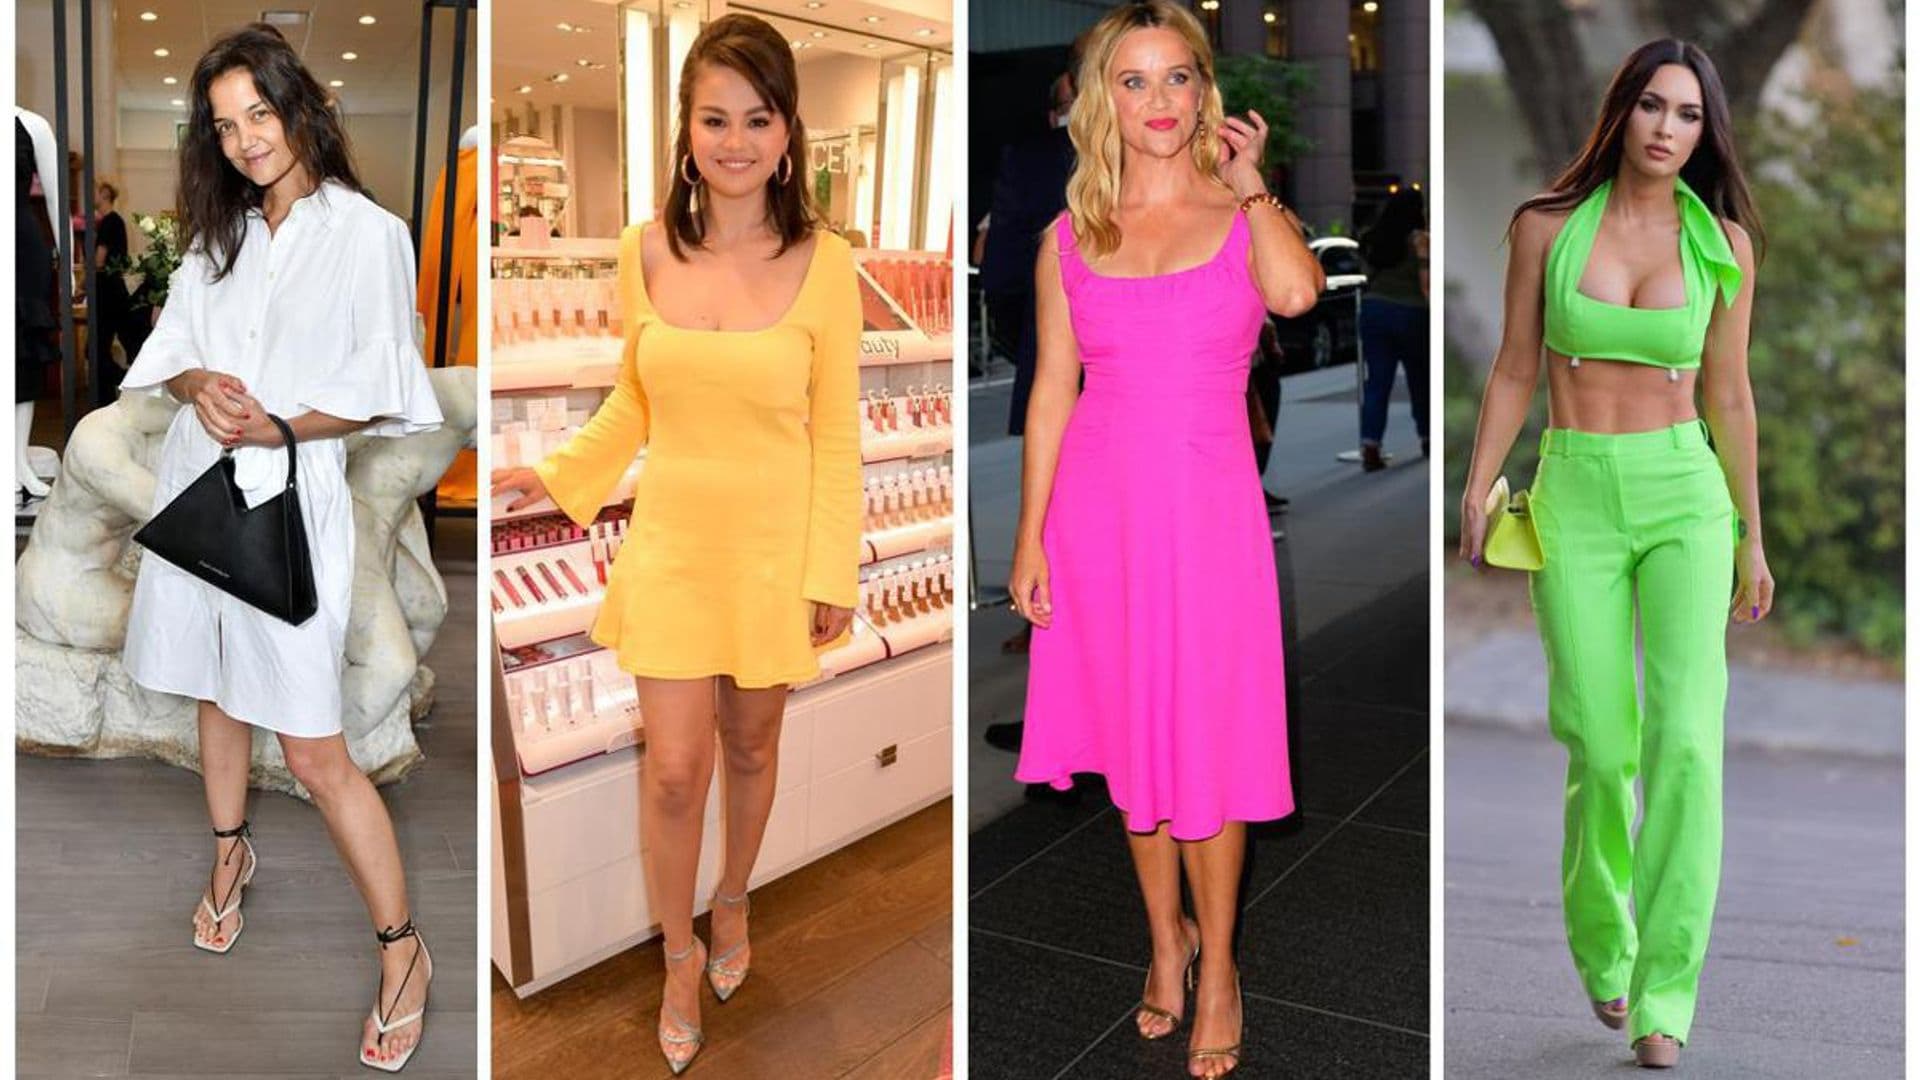 Top Celeb Styles of the Week - July 15th